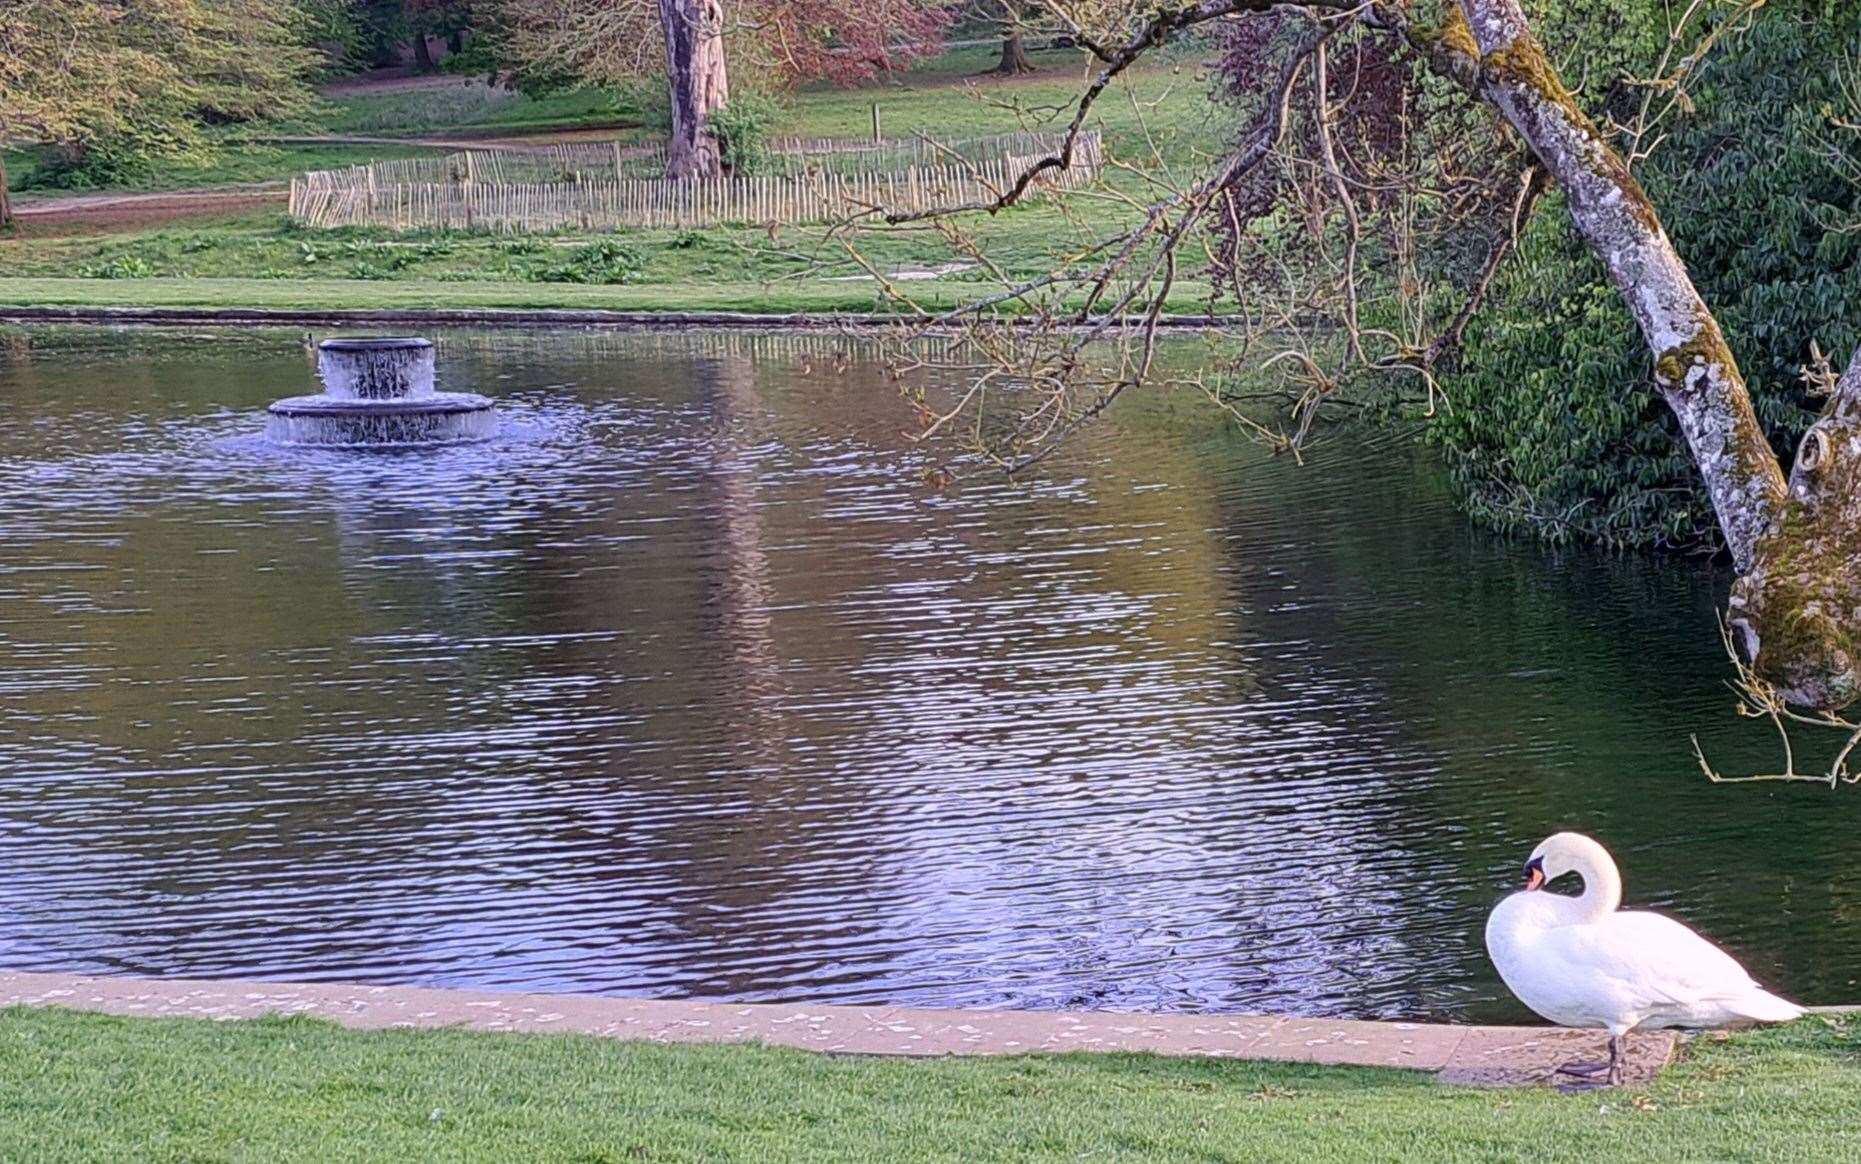 Kearsney Abbey is home to lakes, children’s play areas and woodland walks